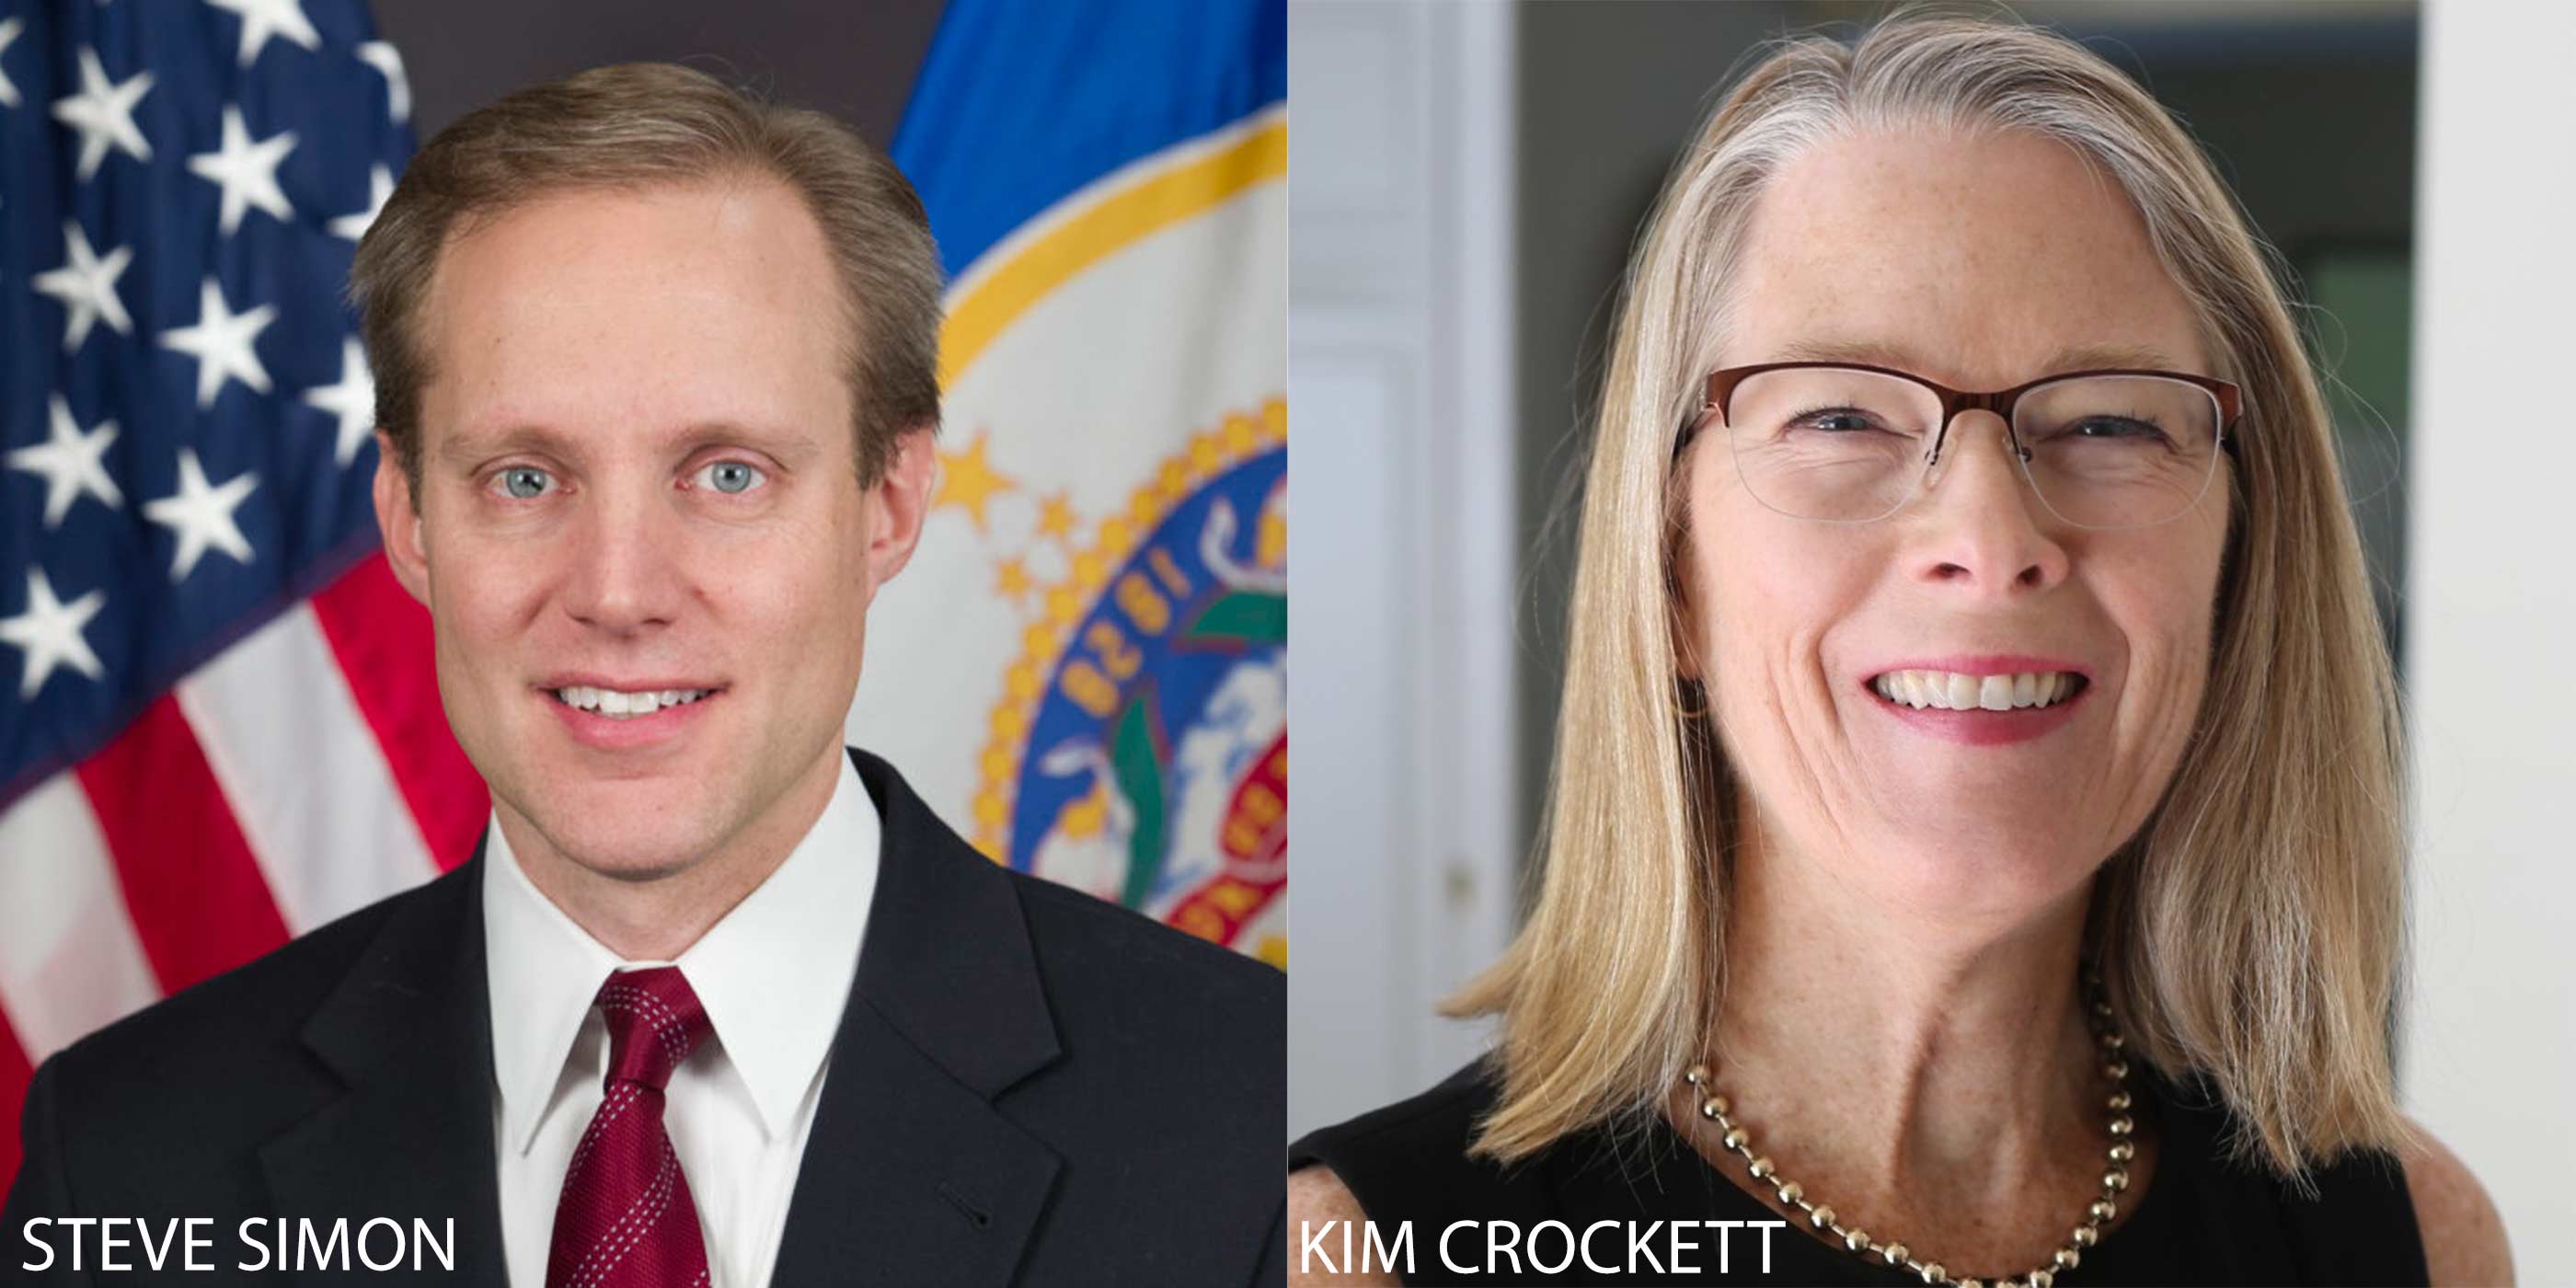 On the left, an image of a smiling Minnesota Secretary of State Steve Simon with the American and Minnesota flags in the background. On the right, an image of candidate for Minnesota Secretary of State, a smiling Kim Crockett with glasses.